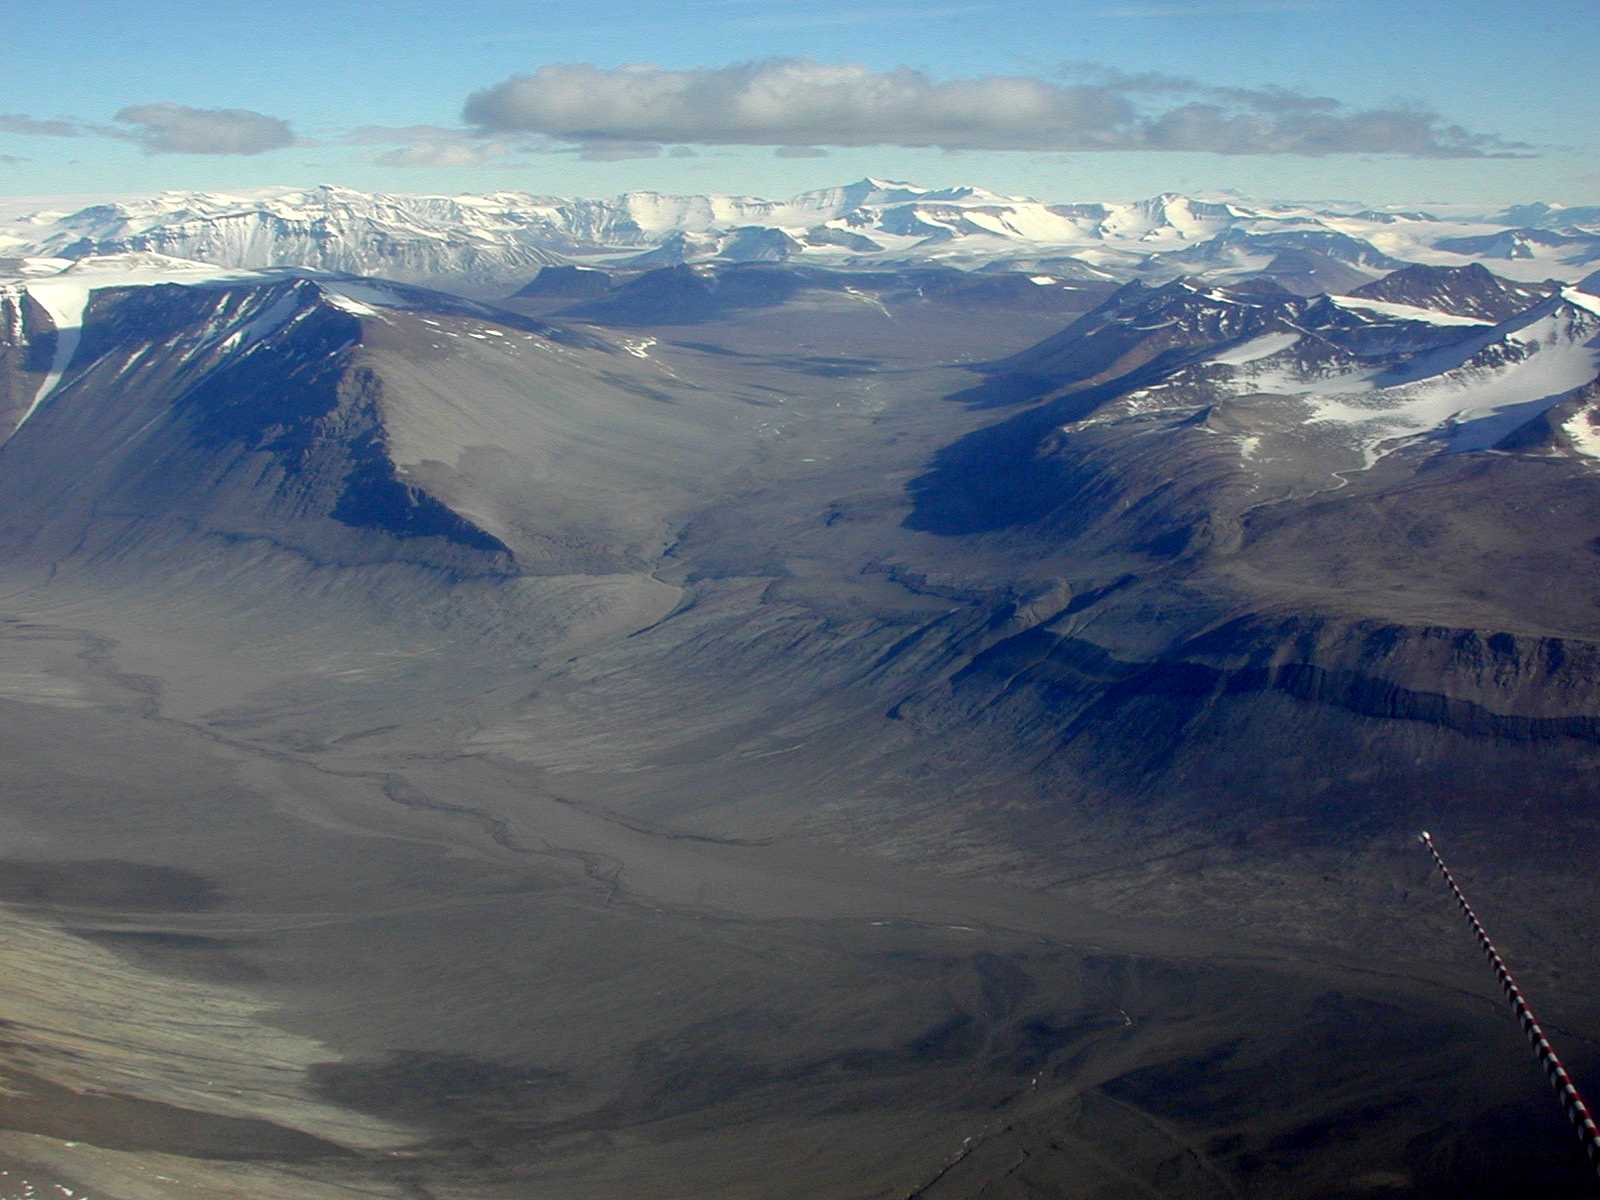 An aerial view of very dry mountain valleys.